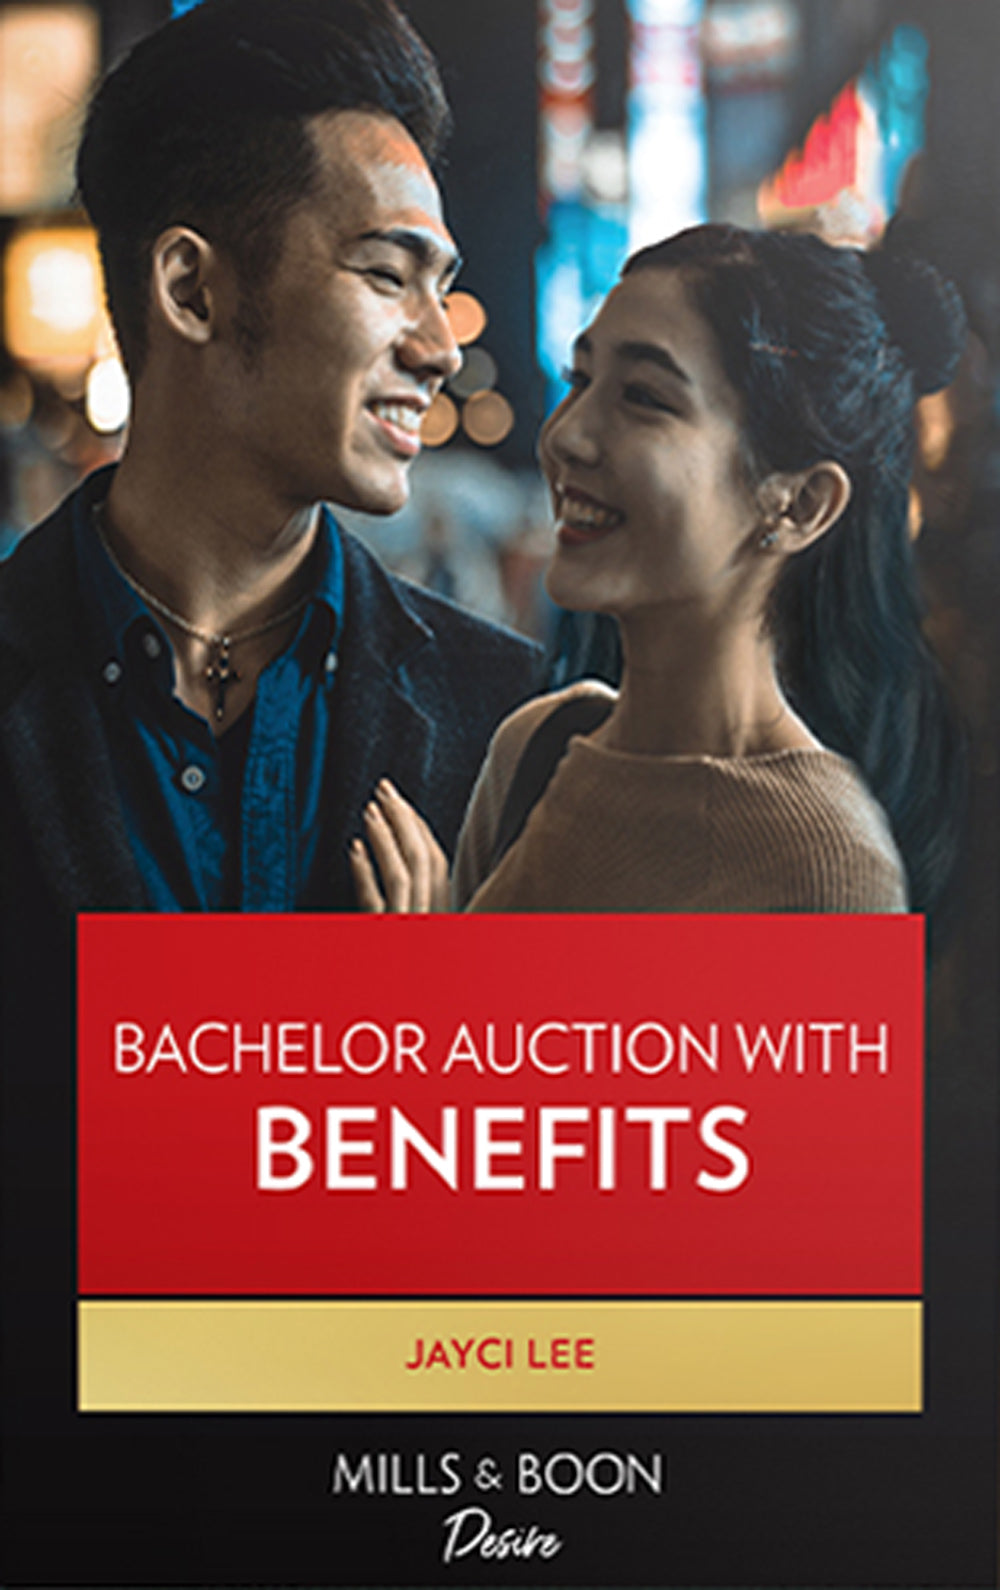 Bachelor Auction with Benefits - Chapter 3